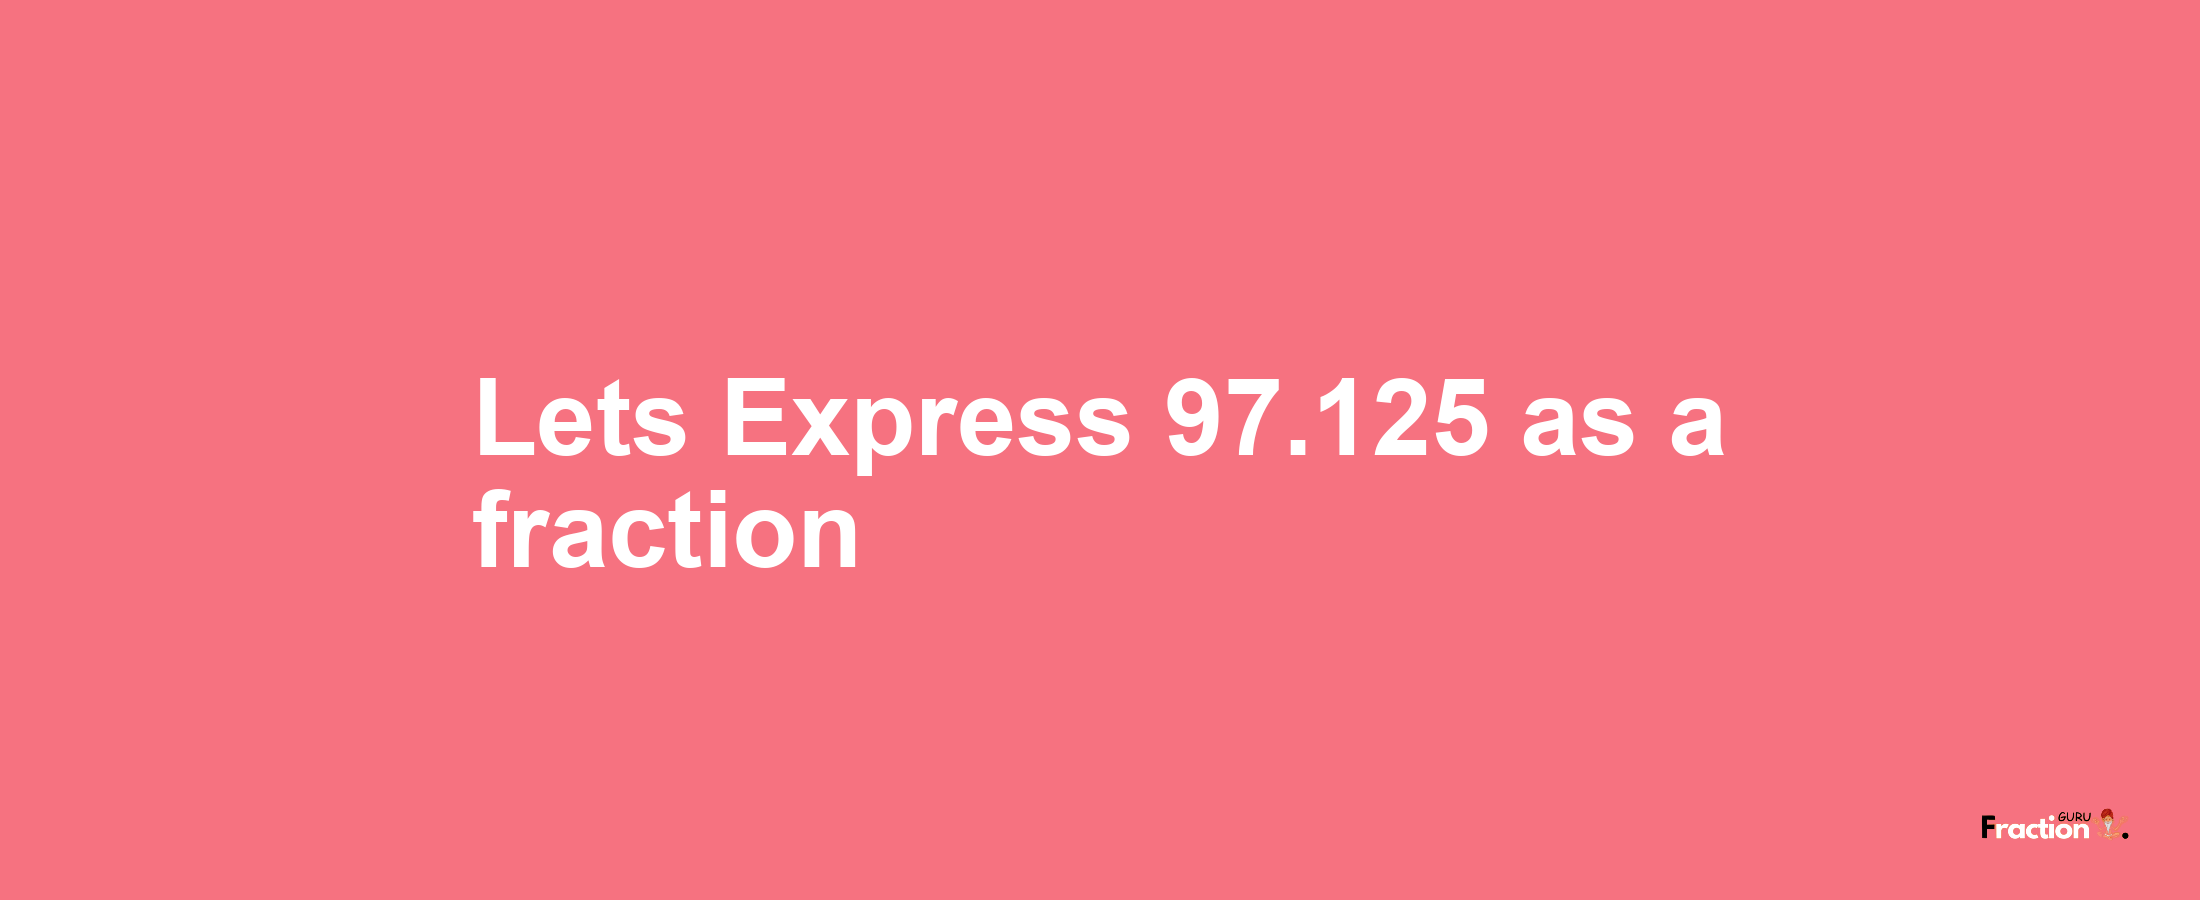 Lets Express 97.125 as afraction